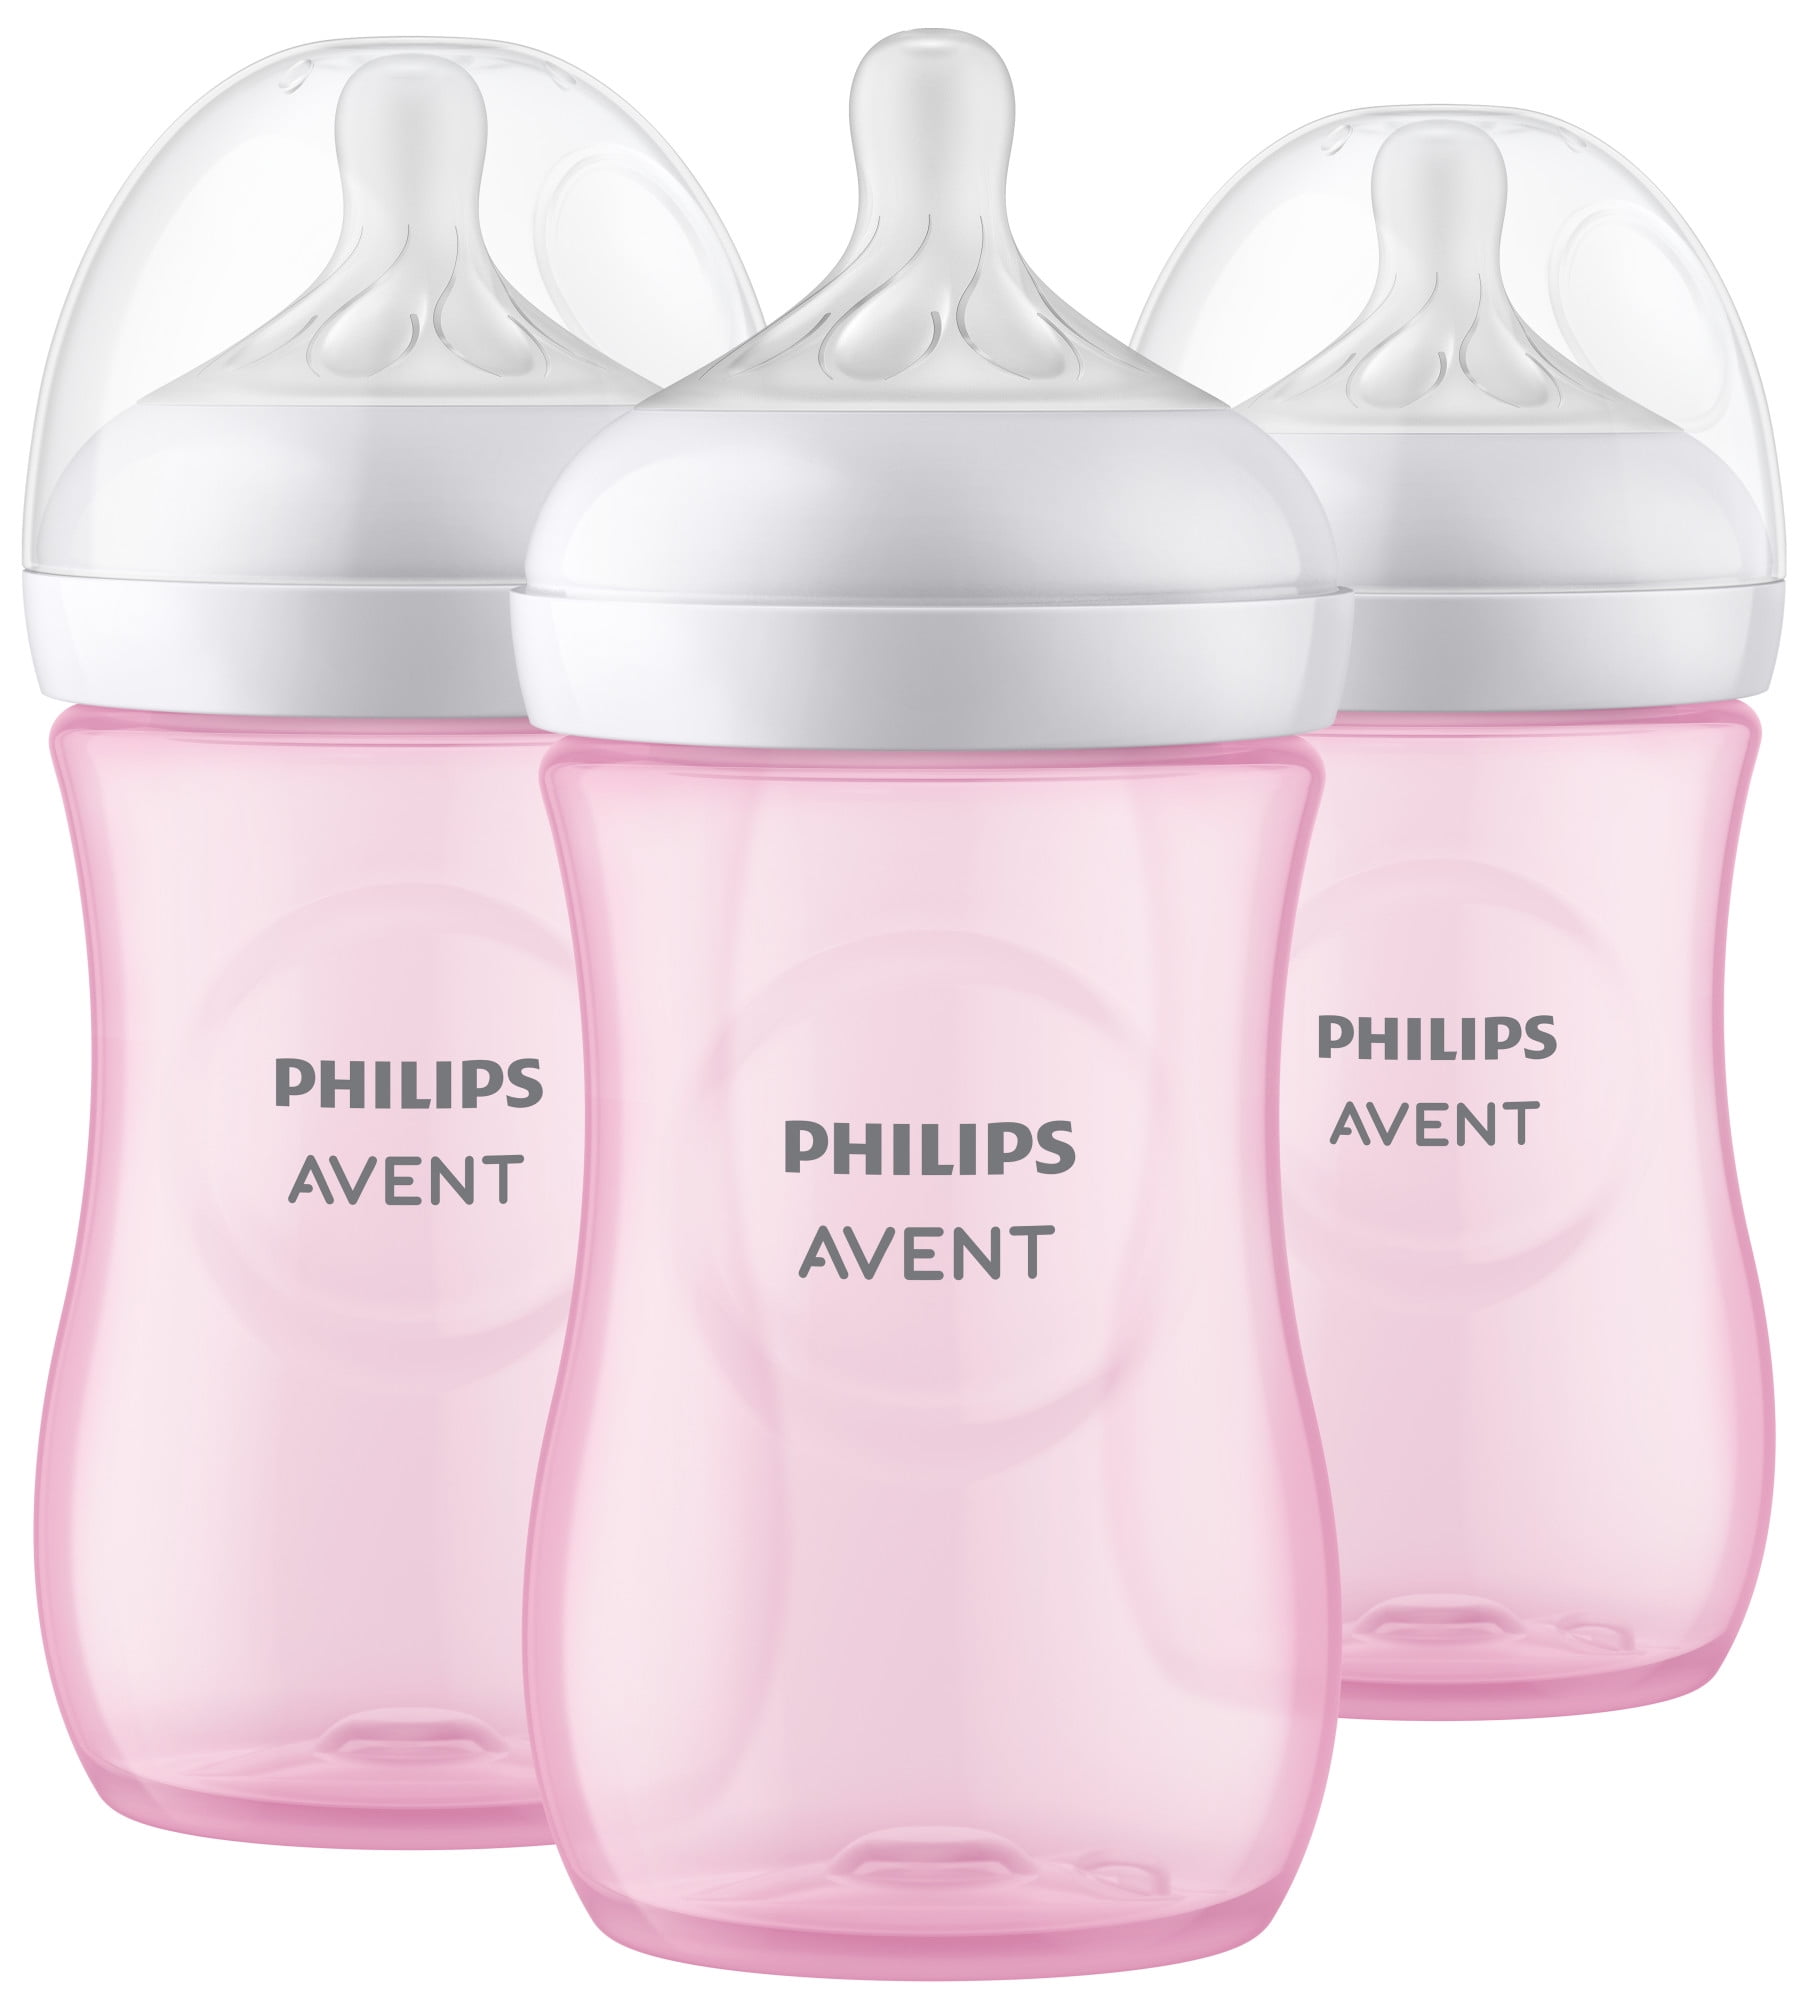 Philips Avent Natural Baby Bottle with Natural Response Nipple, Clear, 9oz,  3pk, SCY903/93